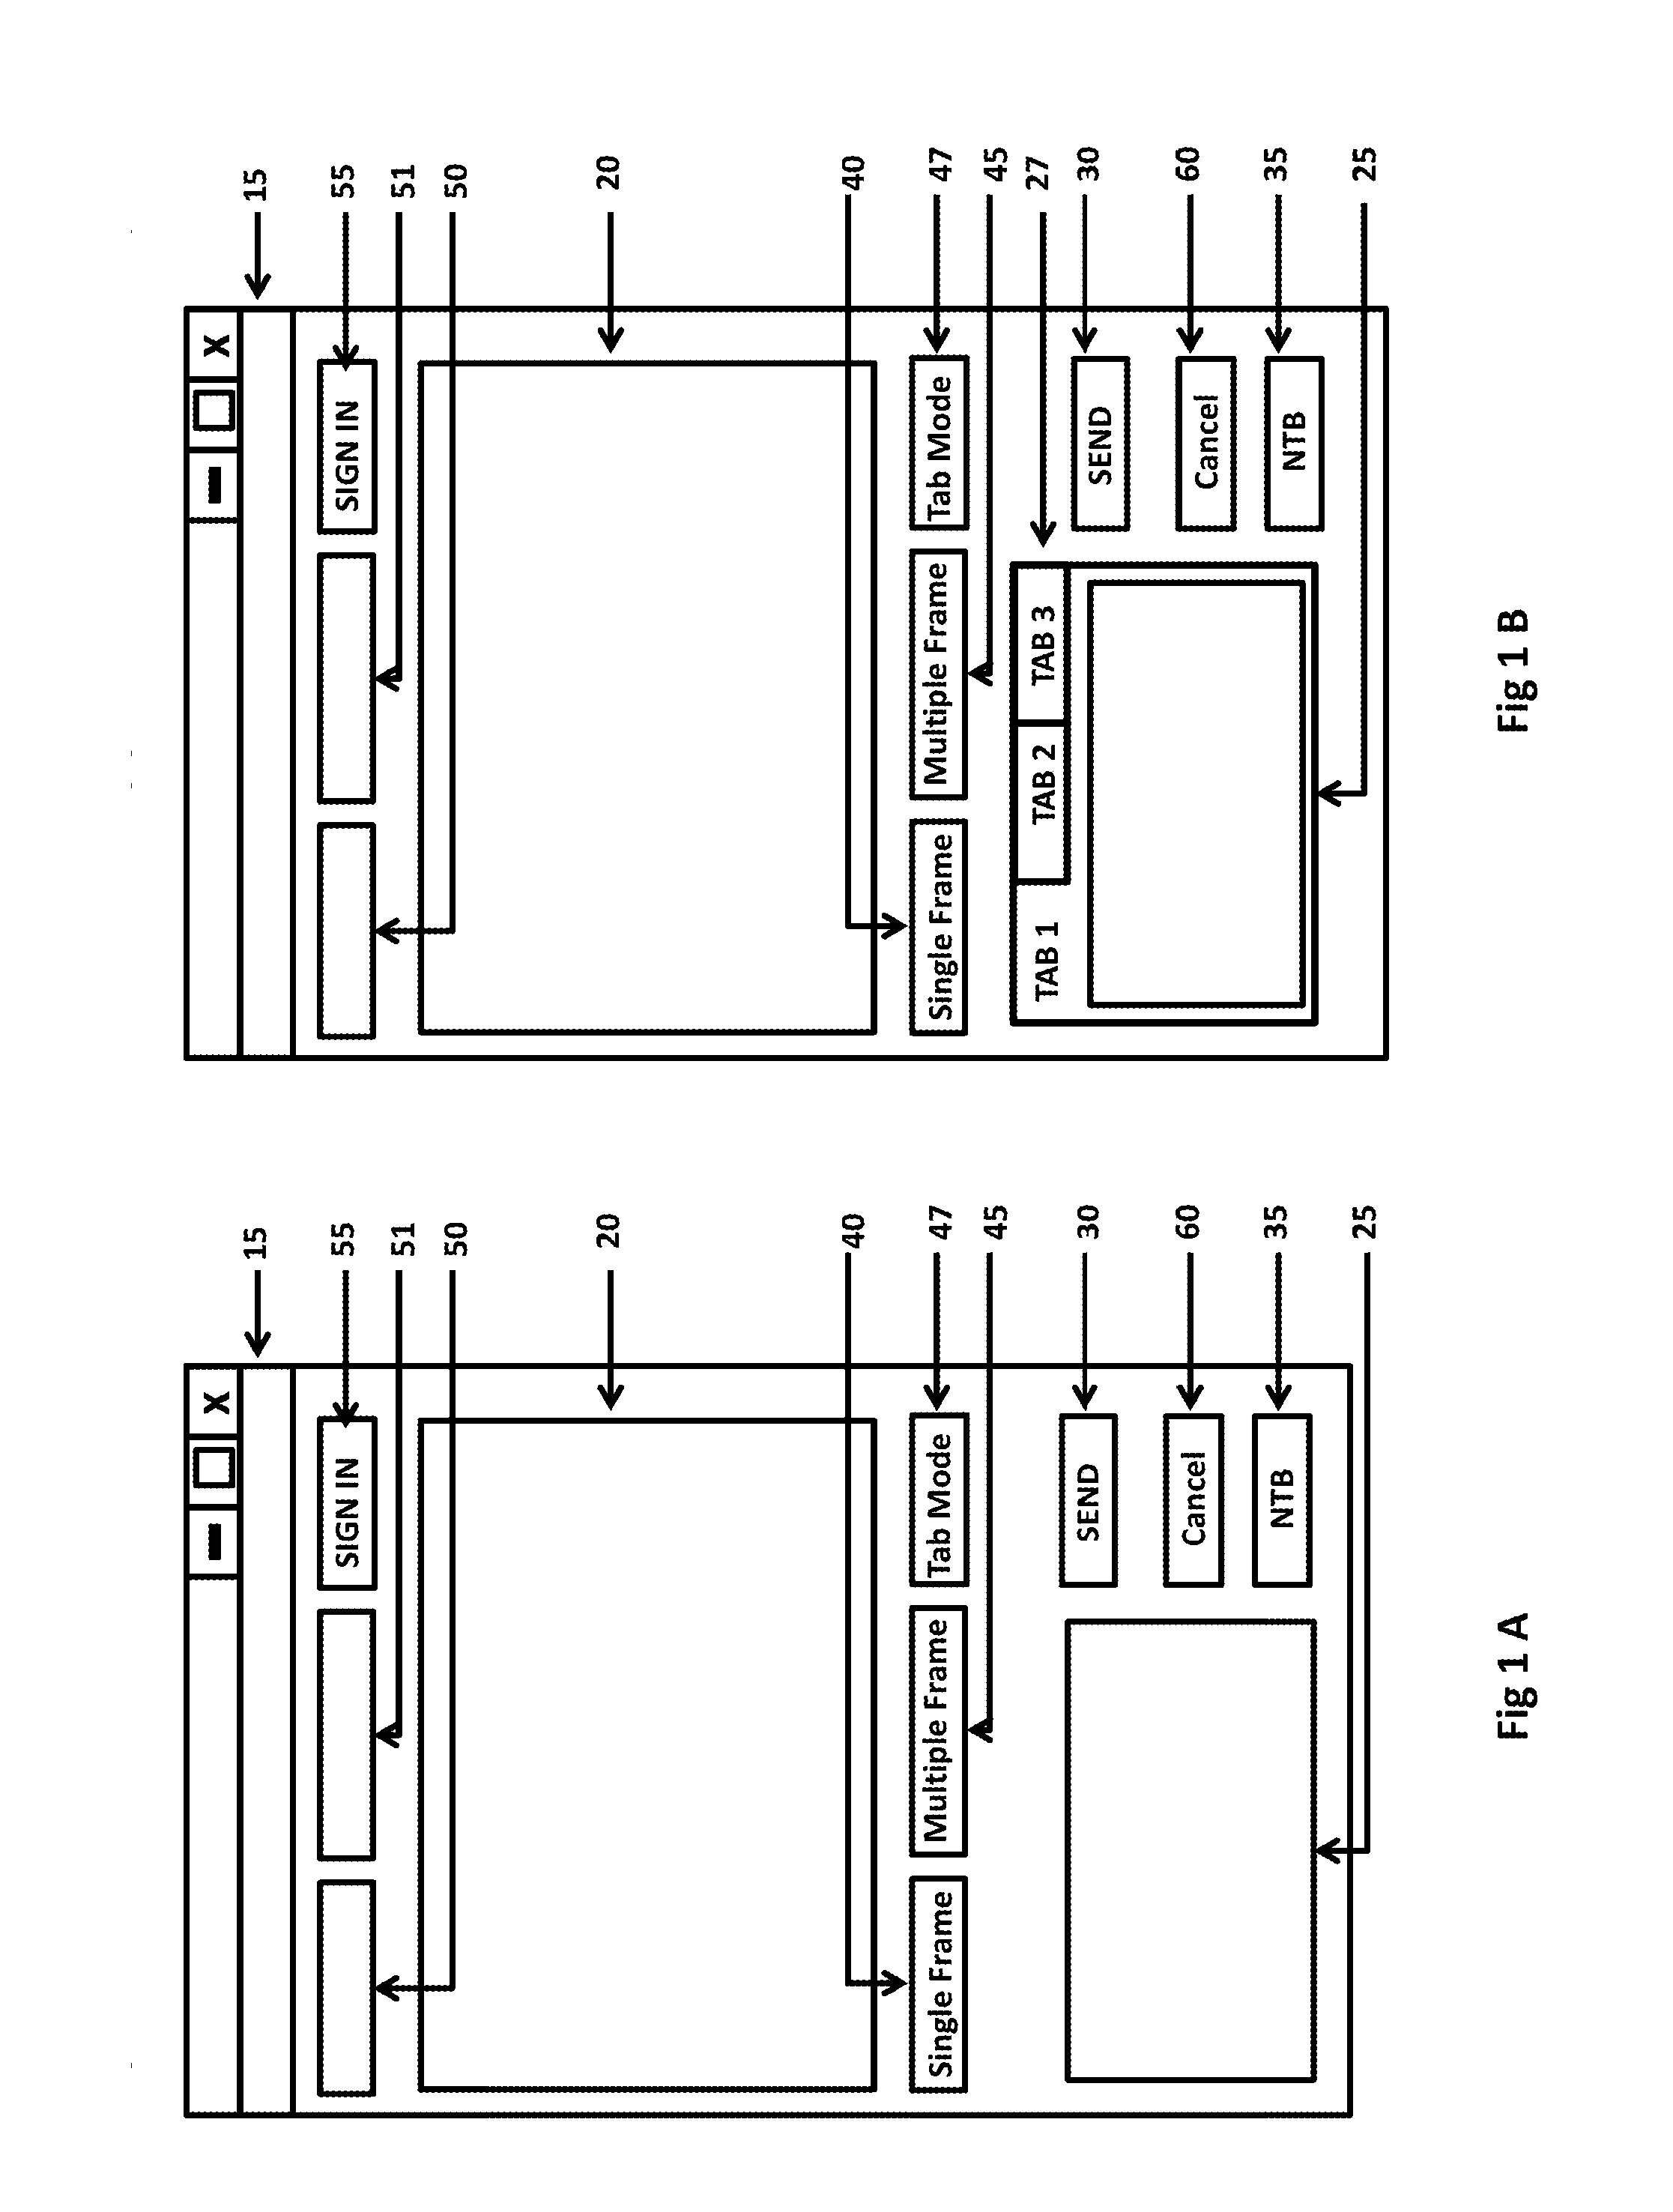 Method, System and Computer Program Product for Messaging Over a Network